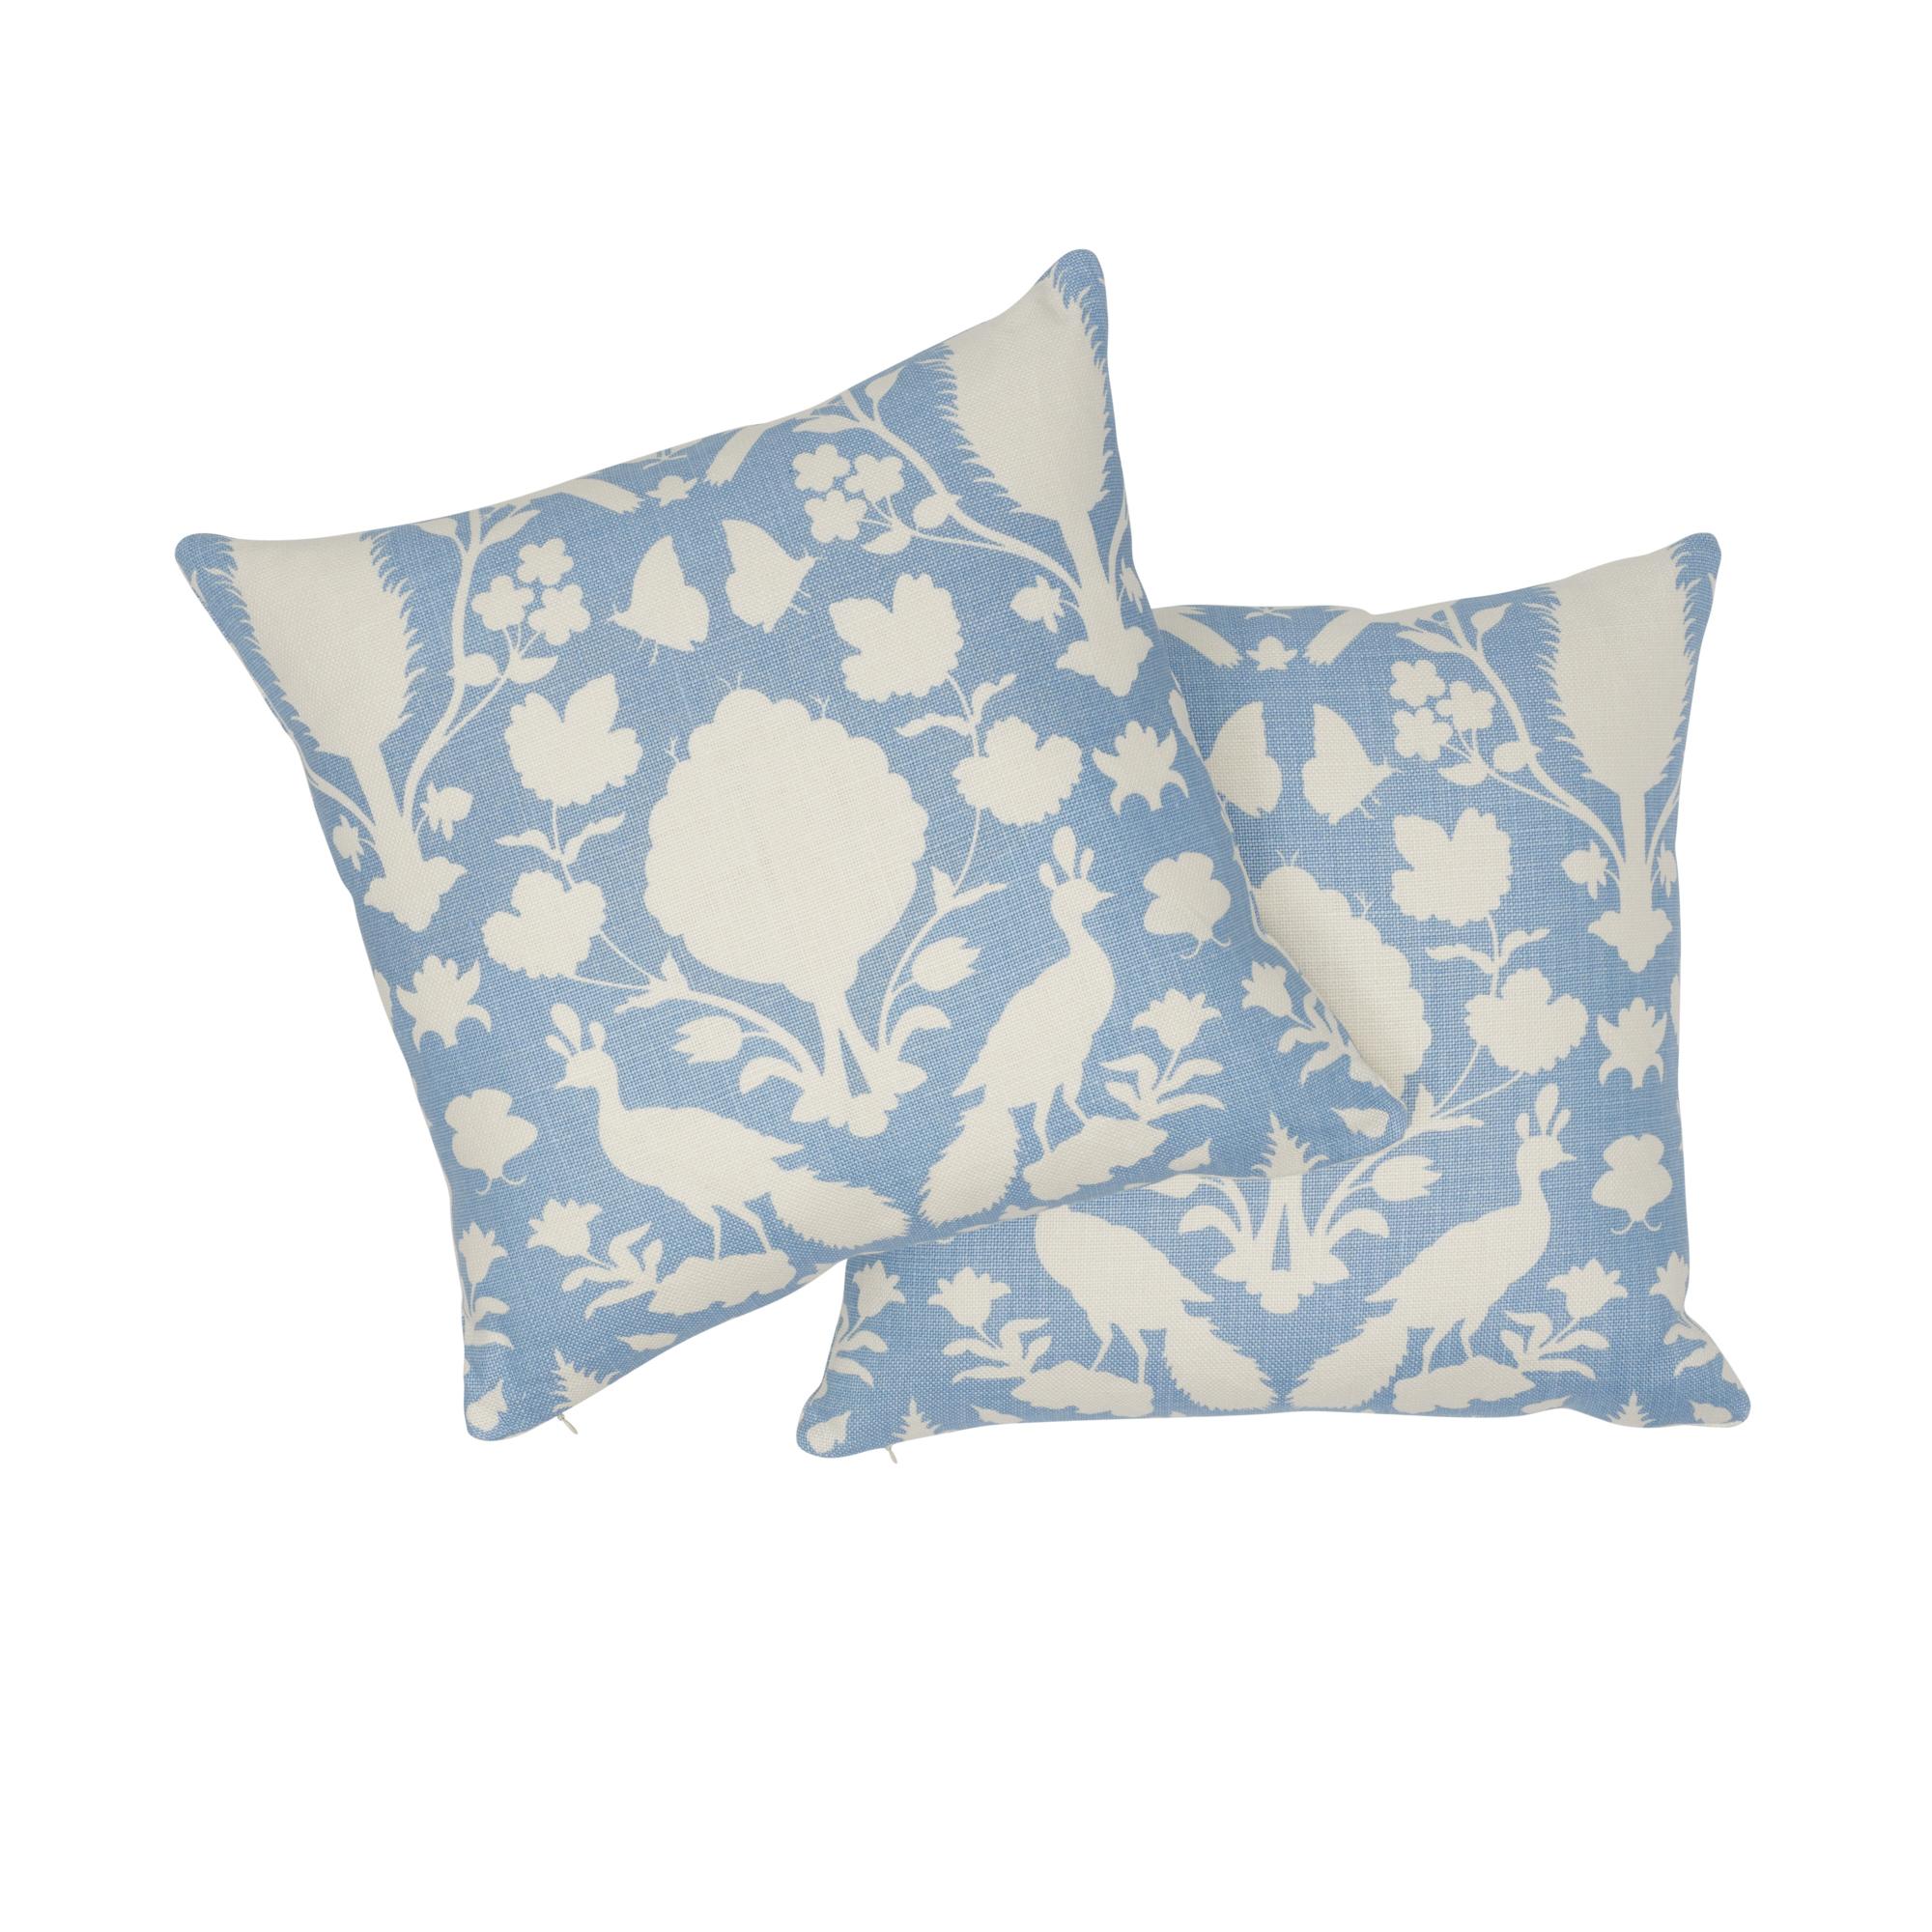 Schumacher Chenonceau Sky Linen Two-Sided Pillow For Sale 1